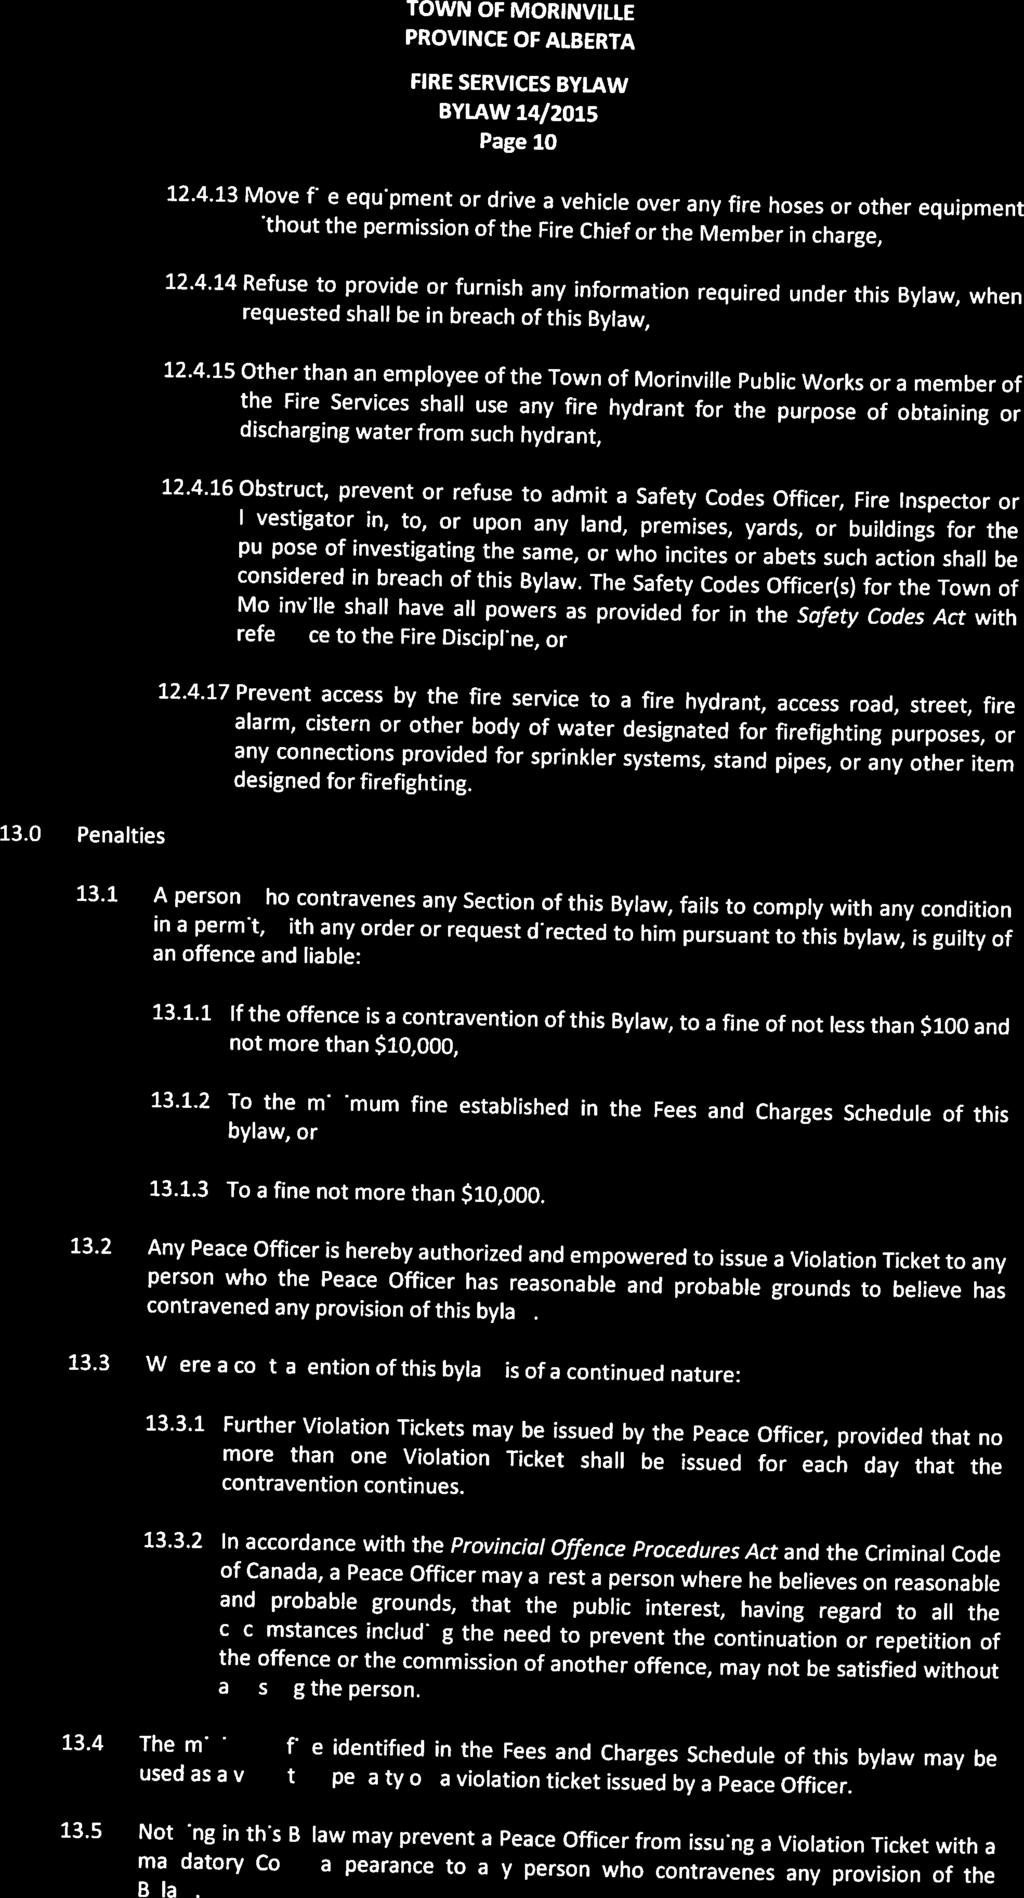 BYLAW 14/ 215 Page 1 Q 12.4.13 Move fire equipment or drive a vehicle over any fire hoses or other equipment without the permission of the Fire Chief or the Member in charge, 12.4.14 Refuse to provide or furnish any information required under this Bylaw, when requested shall be in breach of this Bylaw, 12.